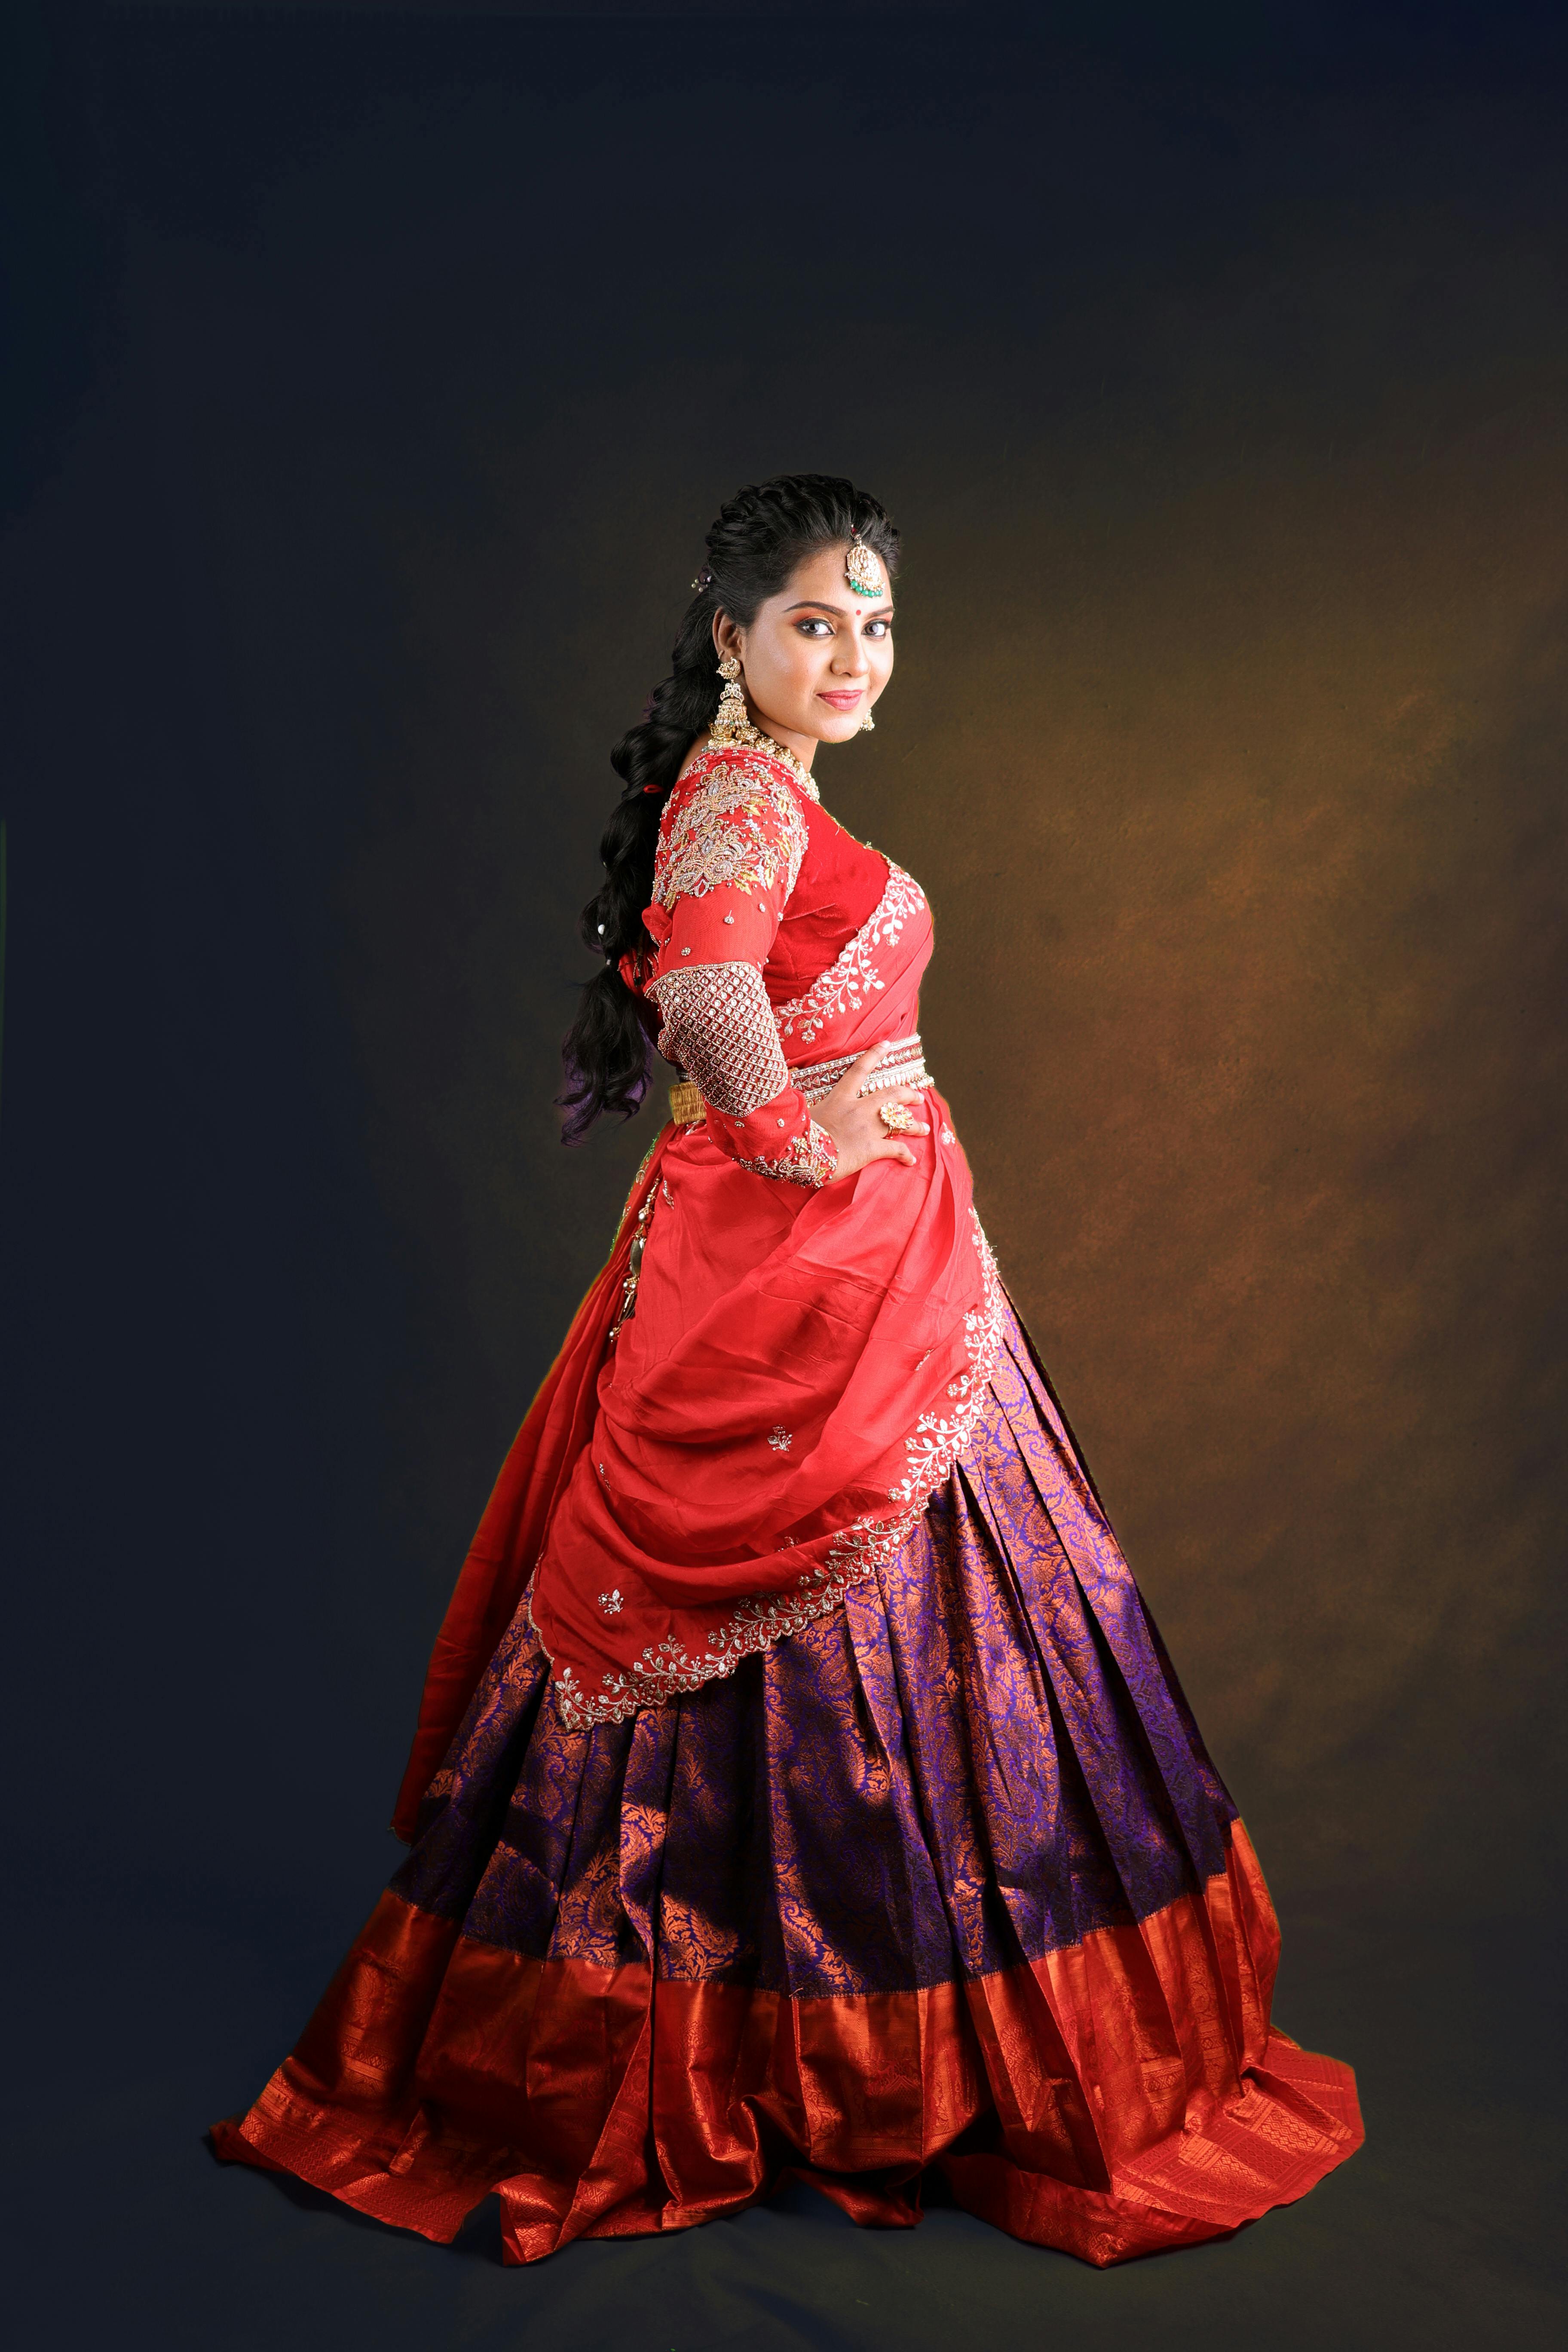 Pin by Rahul Kumar on group | Traditional dresses, Photo poses, Style